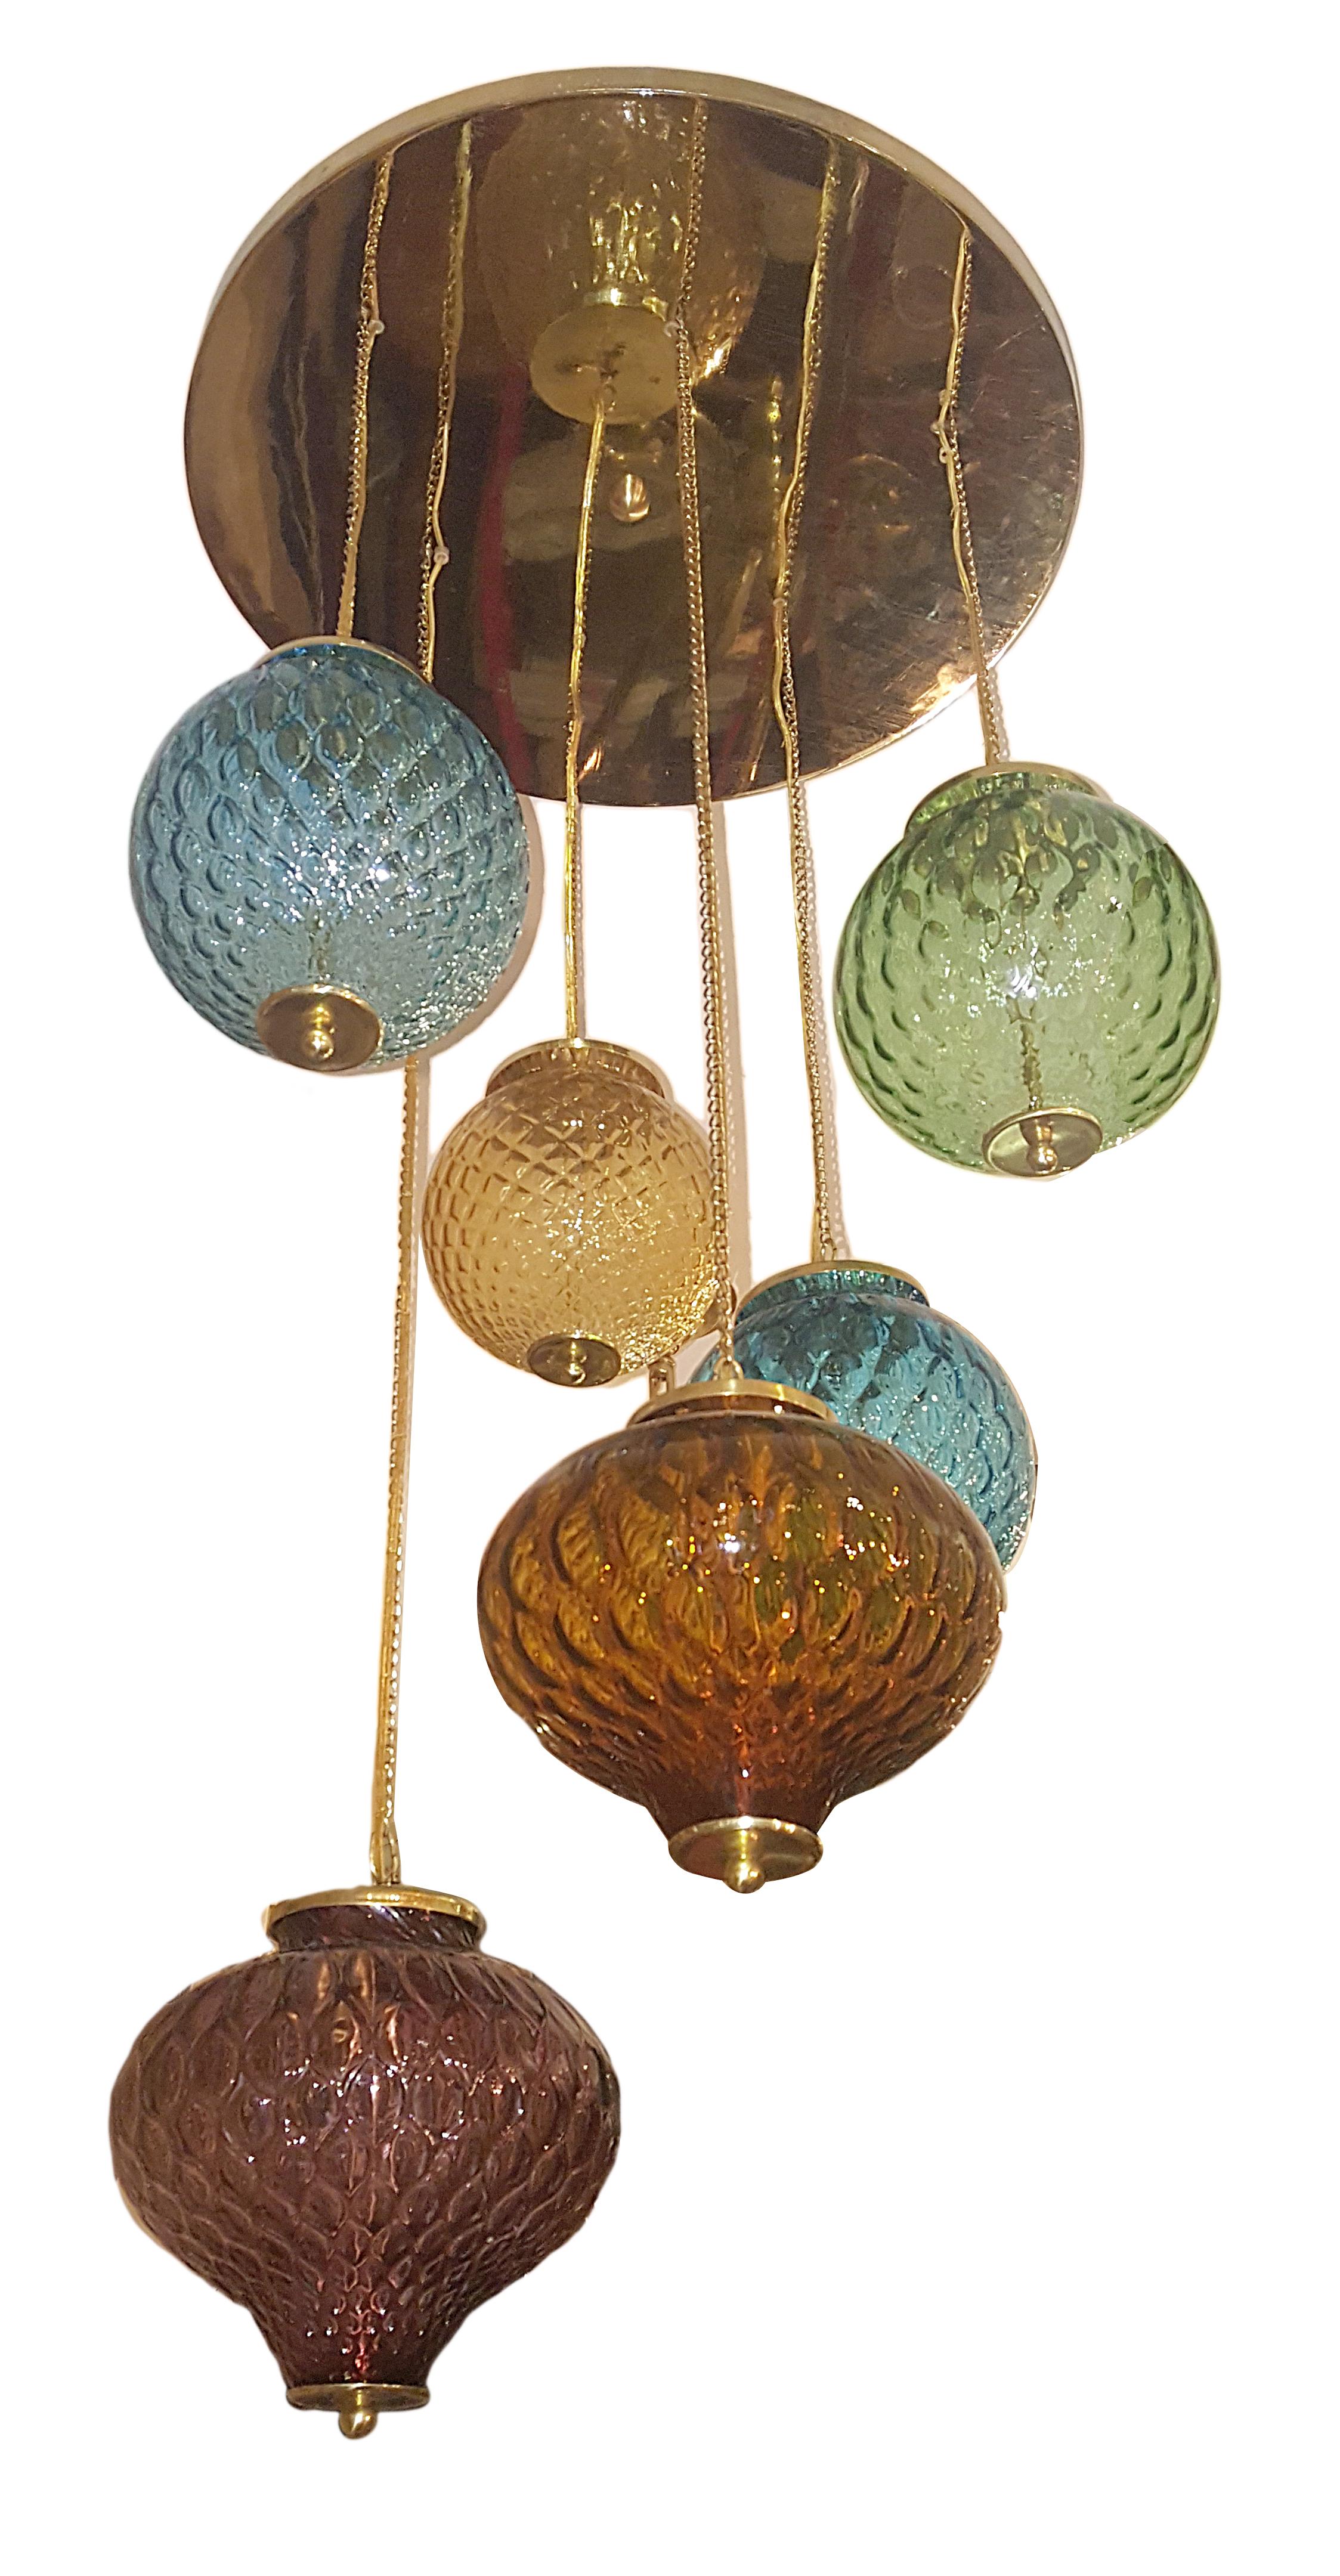 A circa 1960s Italian multi color glass light fixture with six lights.

Measures: W 19 inches, H 41 inches.